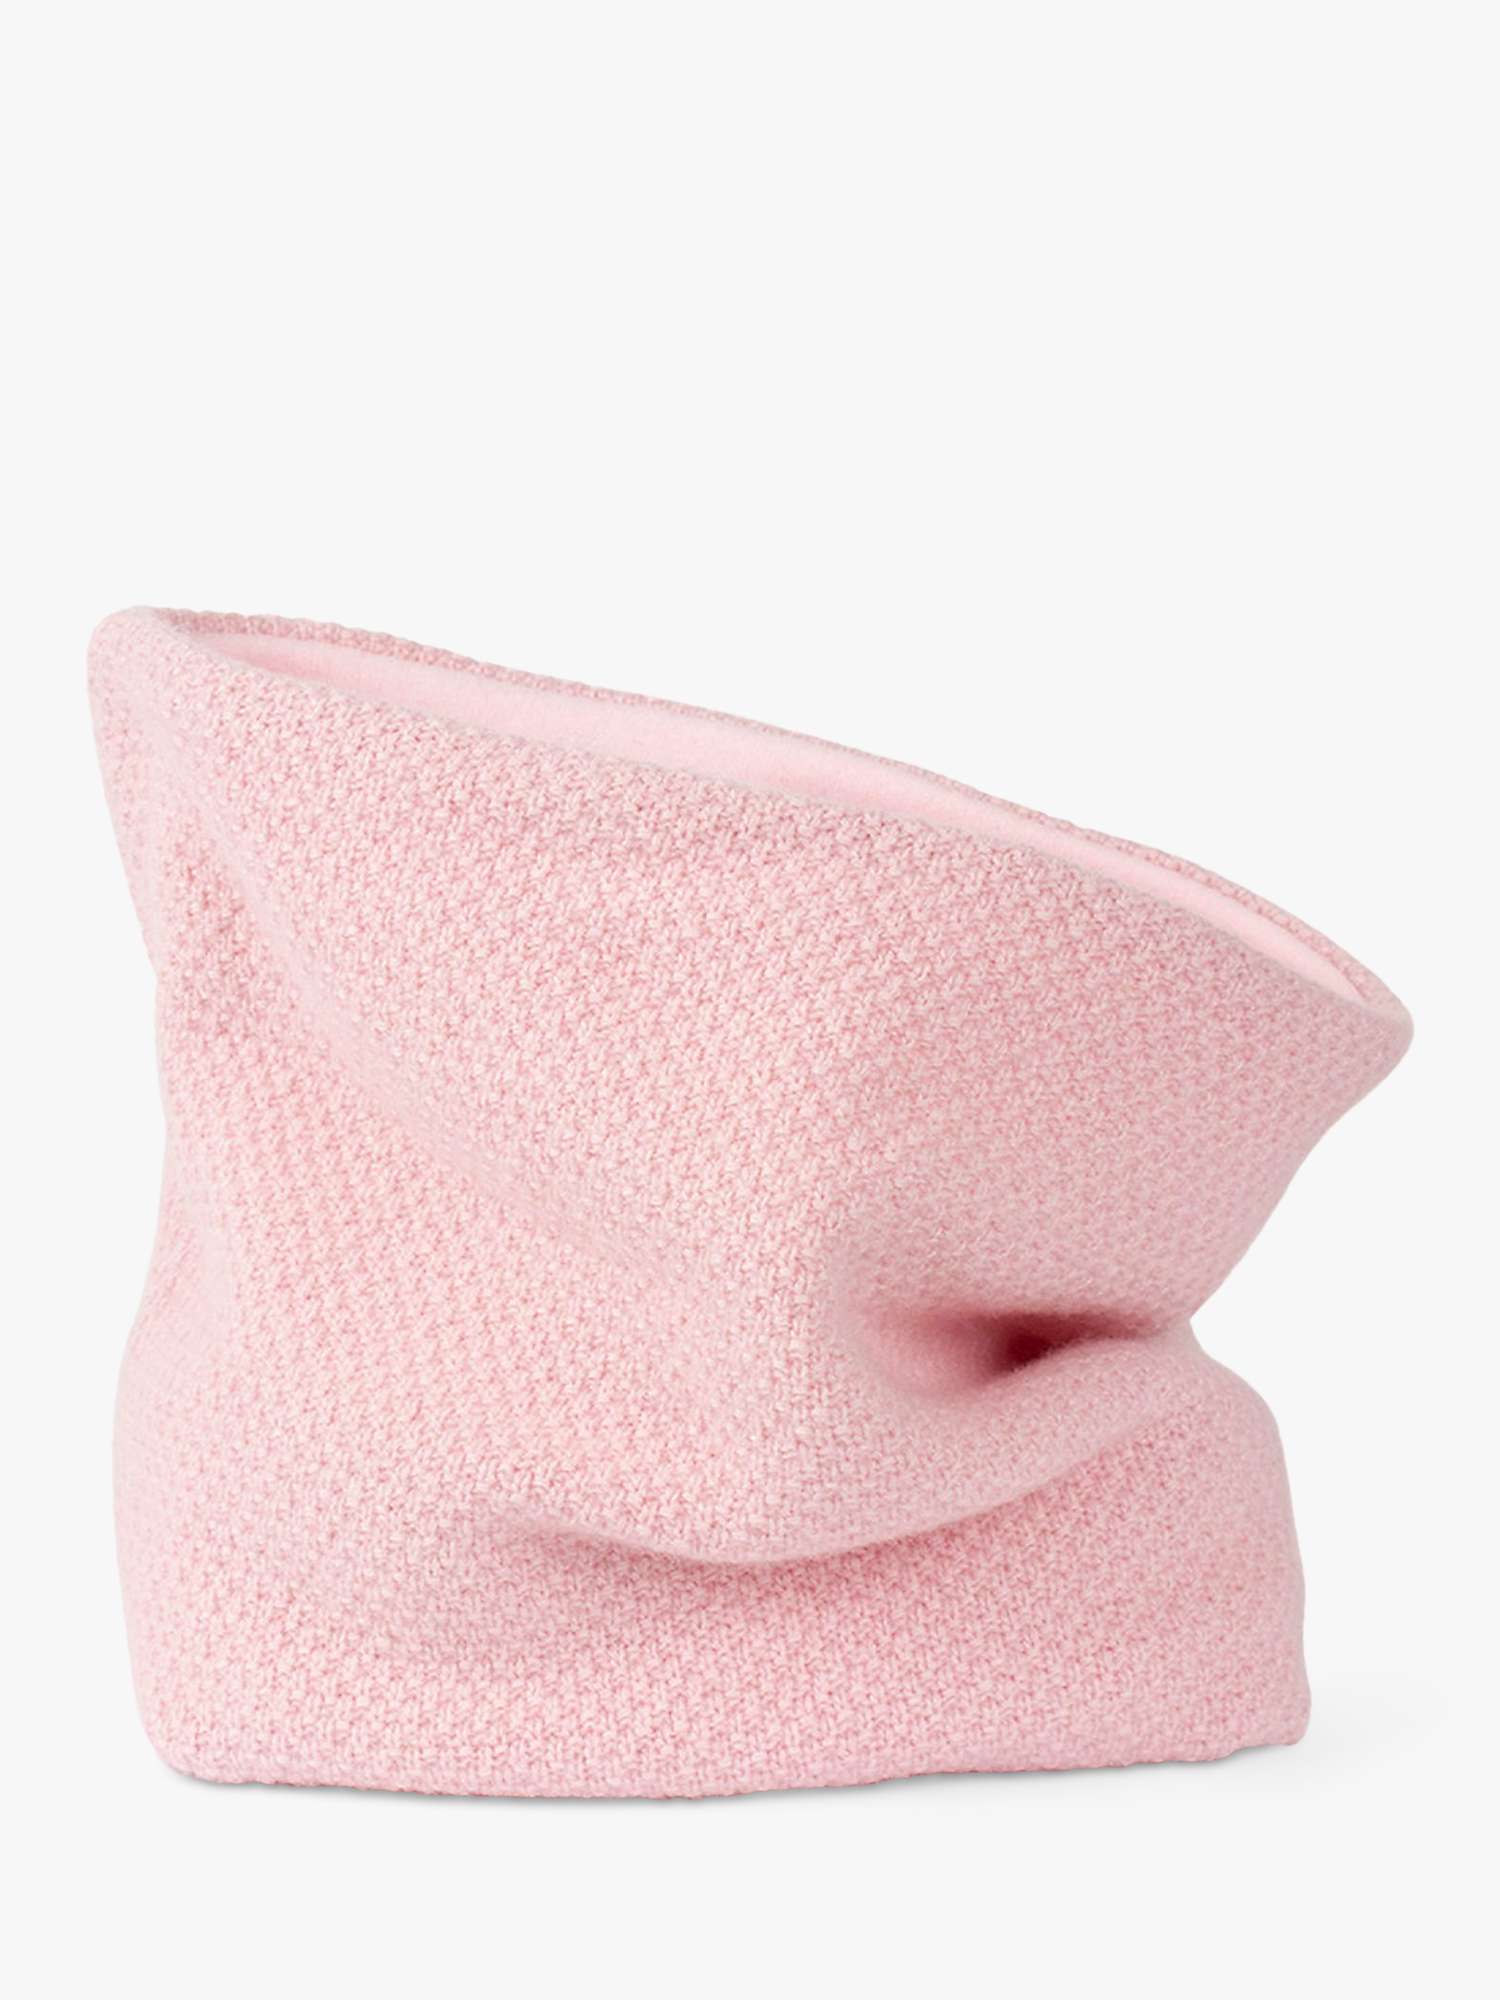 Buy Trotters Kids' Rice Stitch Cashmere Blend Snoody Online at johnlewis.com